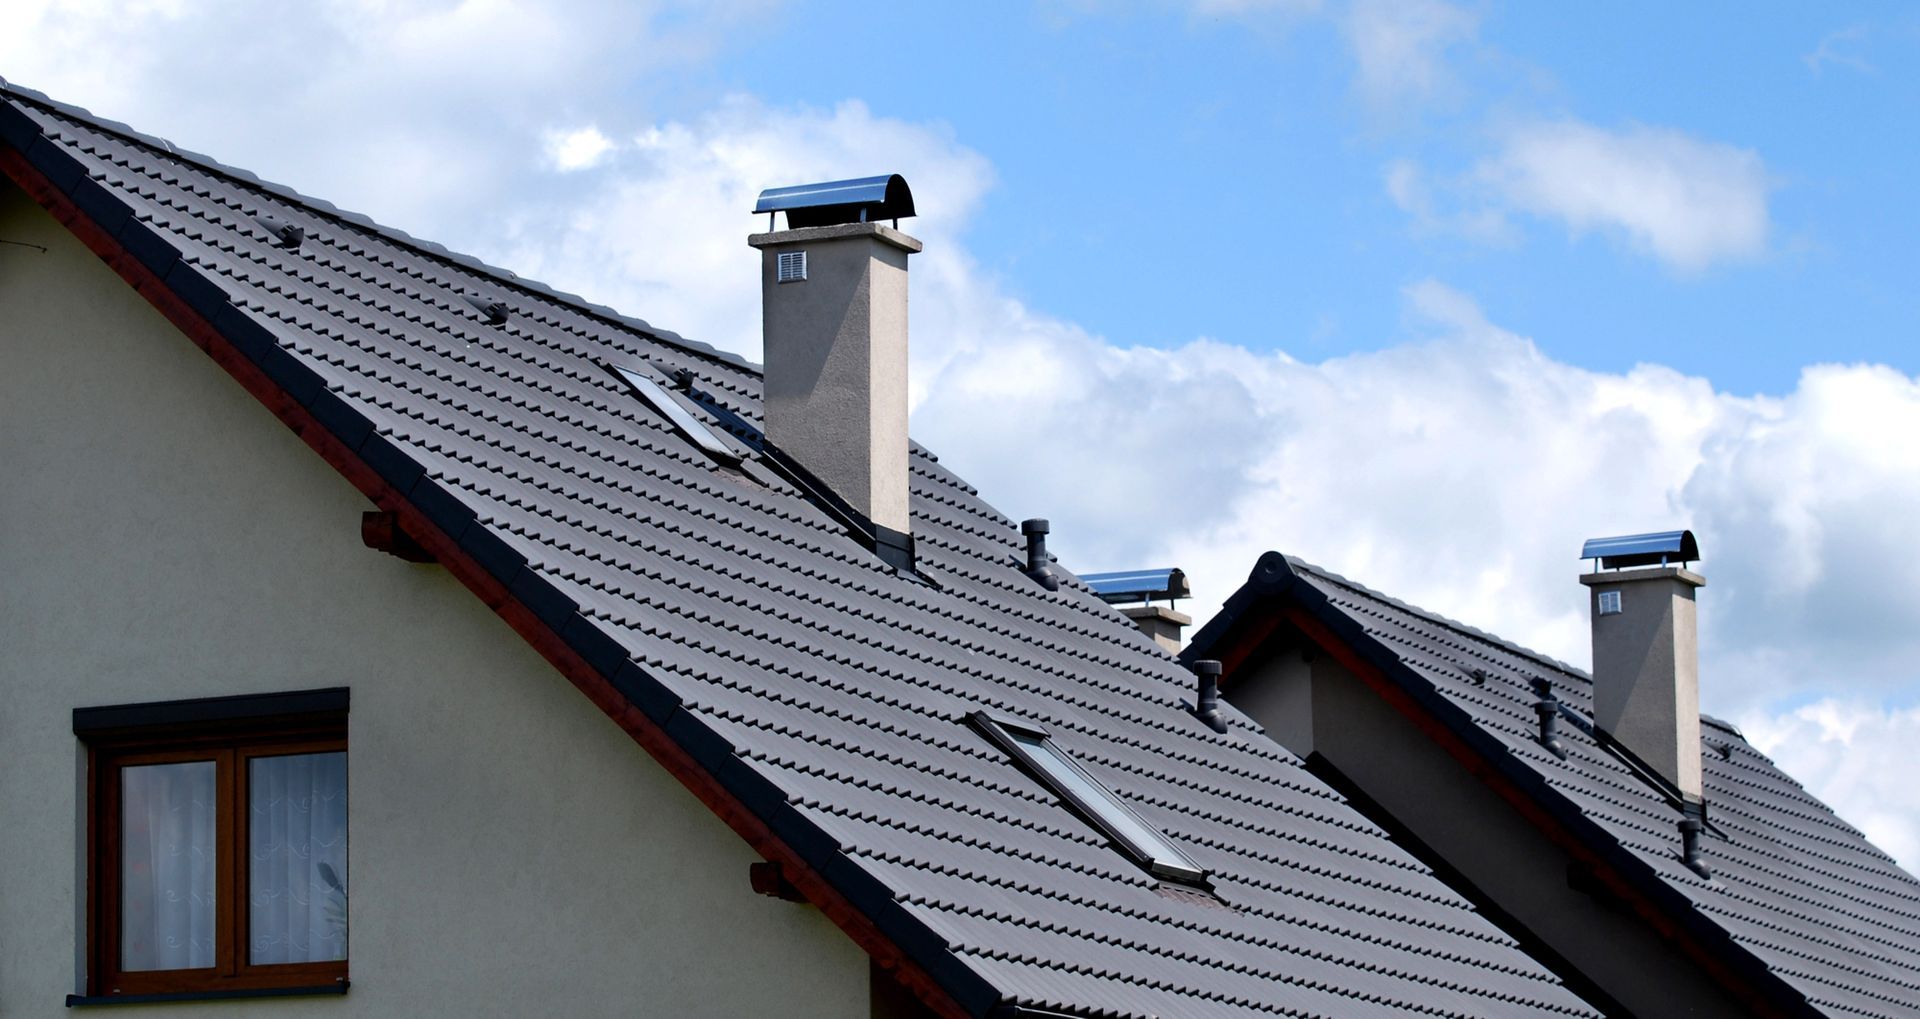 A Step-by-Step Guide on Filing Your Roof Damage Insurance Claims